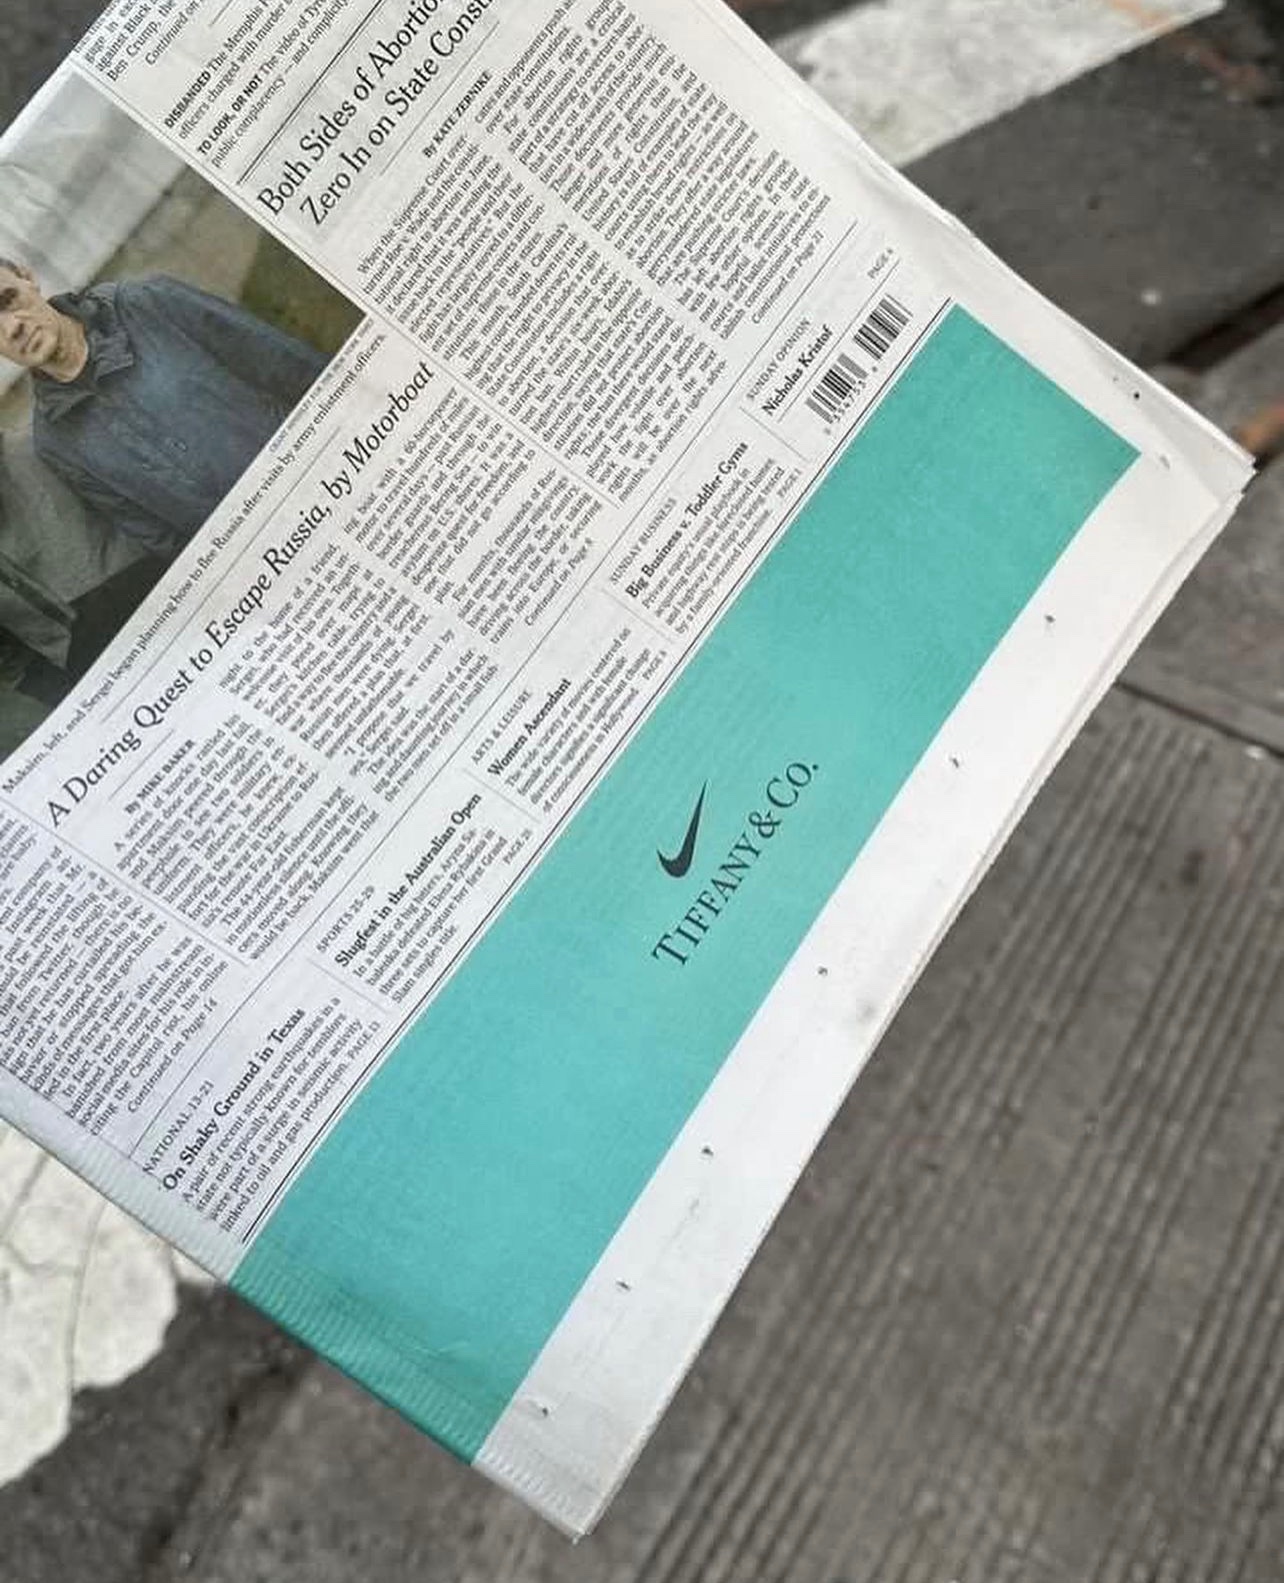 HypeNeverDies Twitter: &amp; CO NIKE Air Force 1 Ad In The New York Times 👀 https://t.co/2gxnWmNZb0" / Twitter